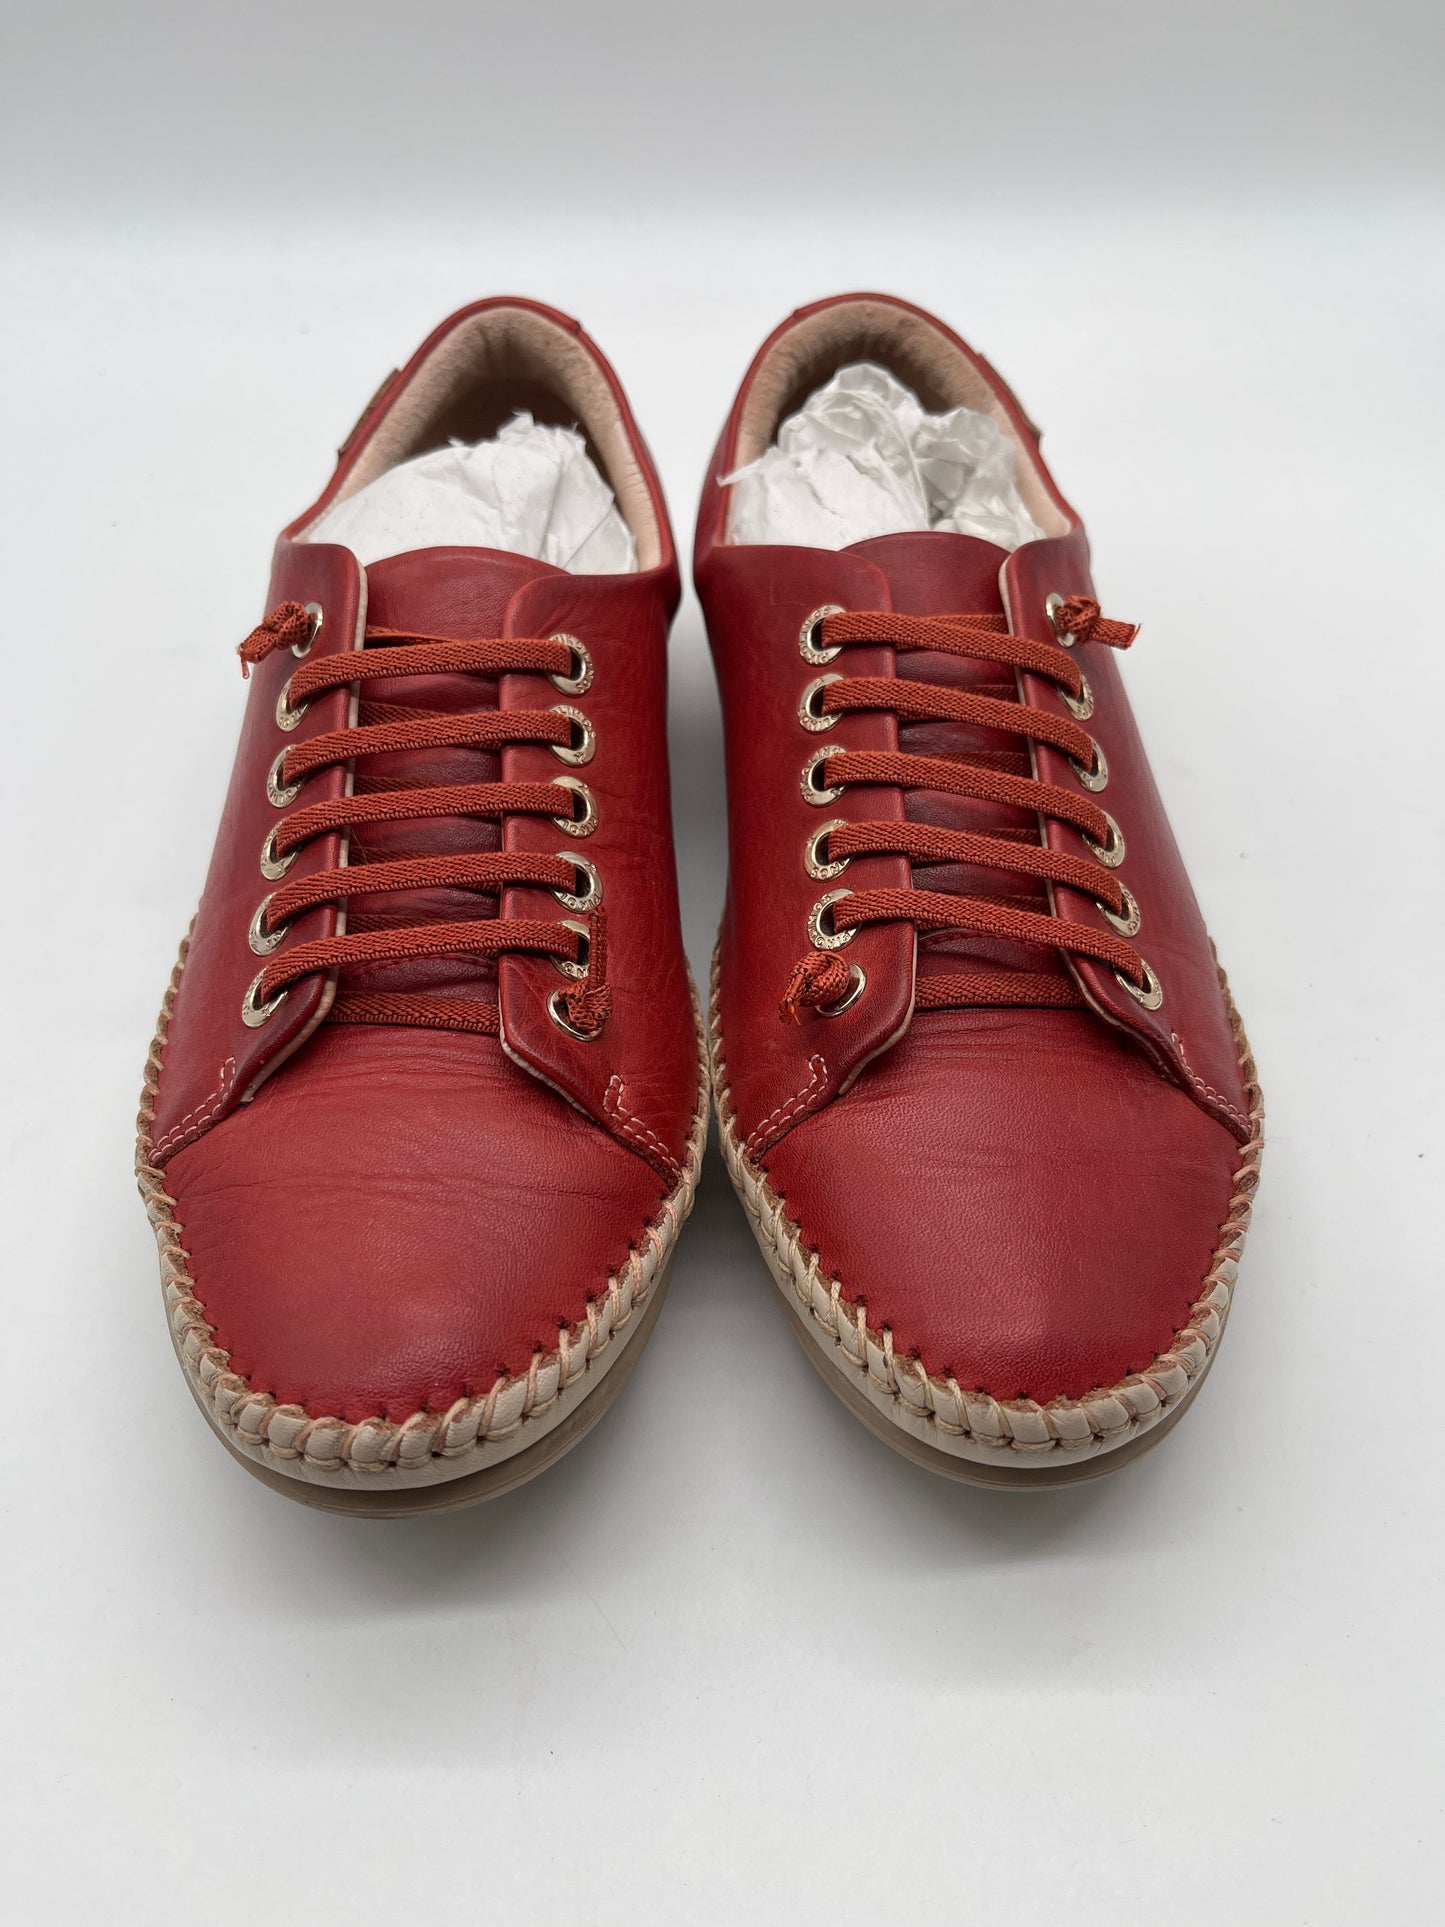 Red Shoes Flats Pikolinos, Size 6